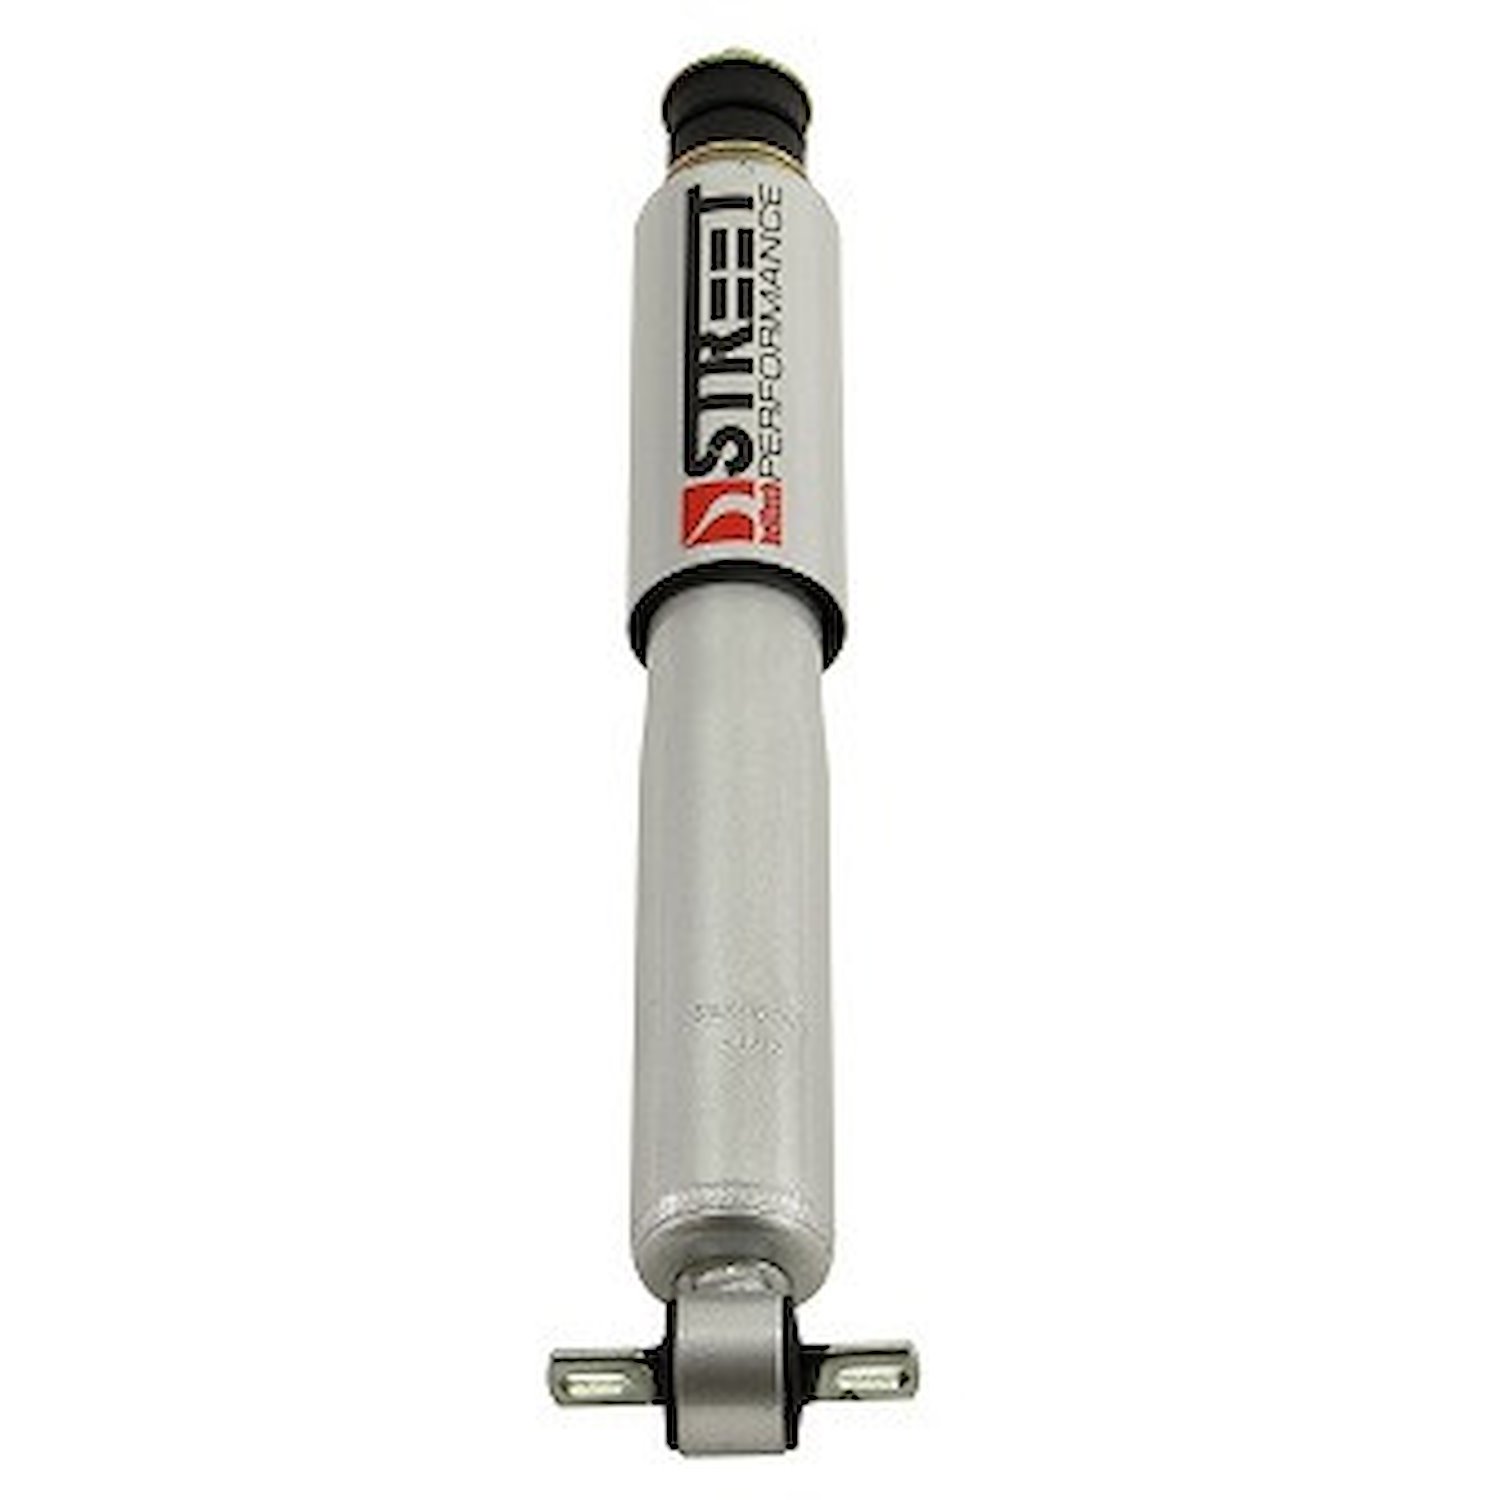 Street Performance OEM Shock for 1970-1979 Ford F-100/F-150 4WD